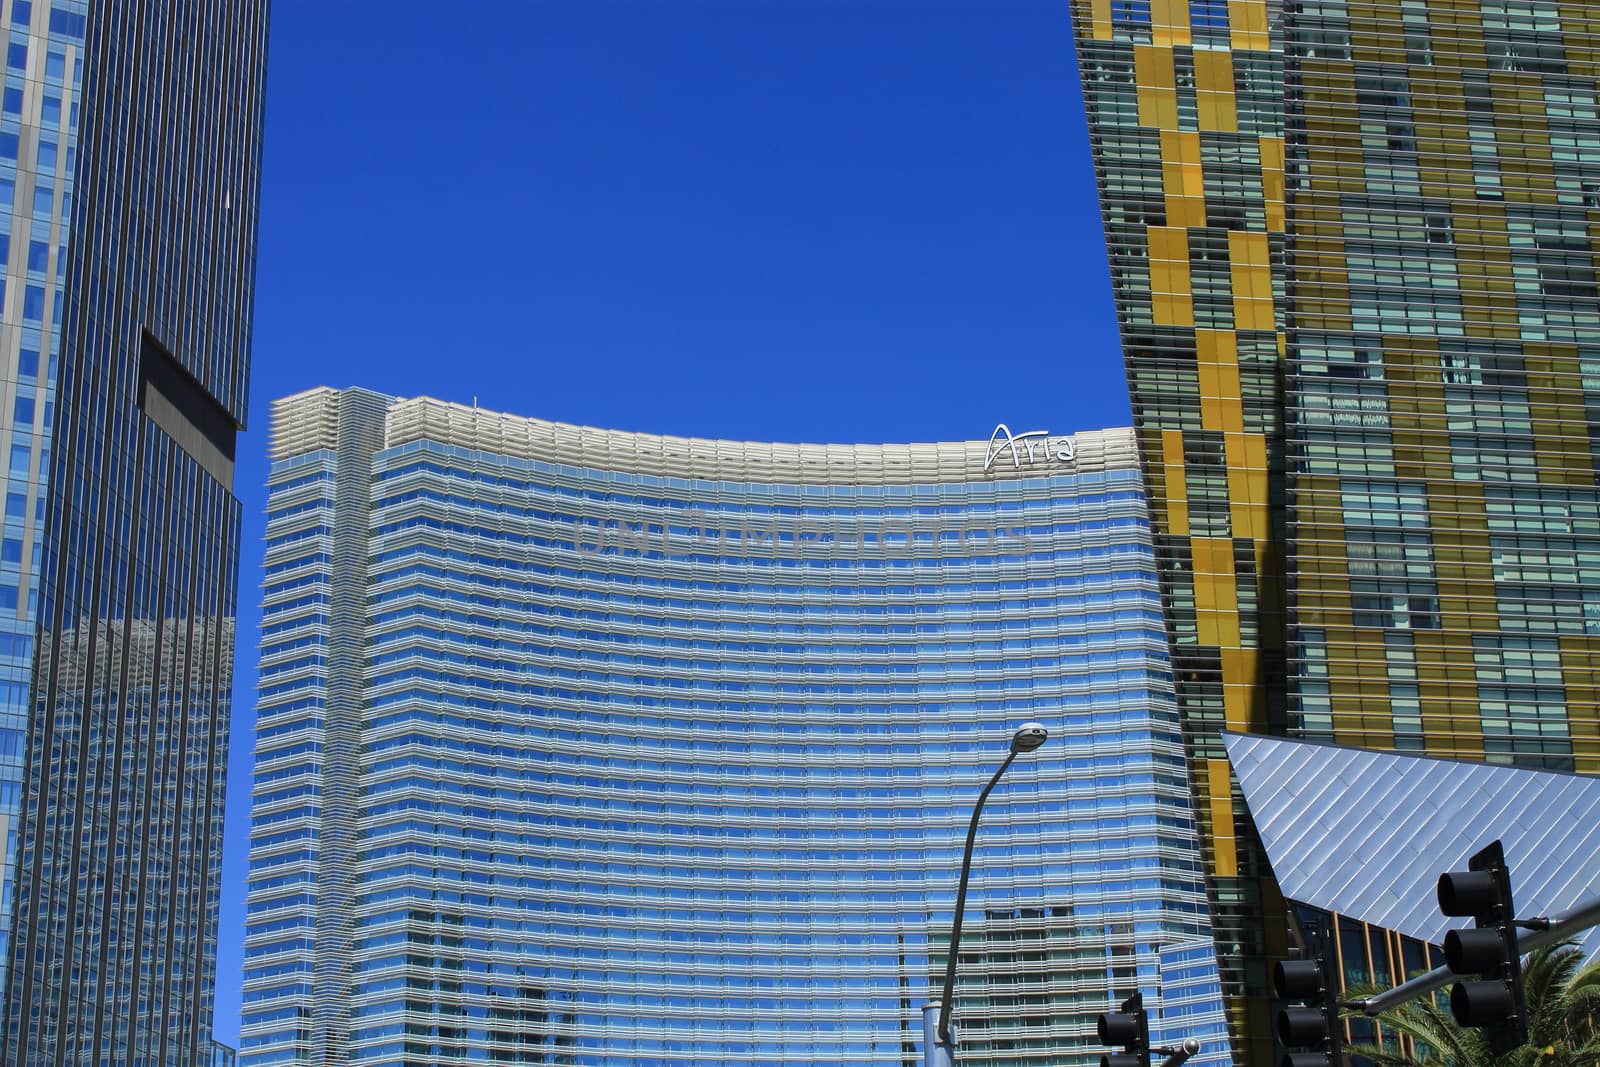 Aria Hotel, part of the City Center Complex on the famous Las Vegas Strip